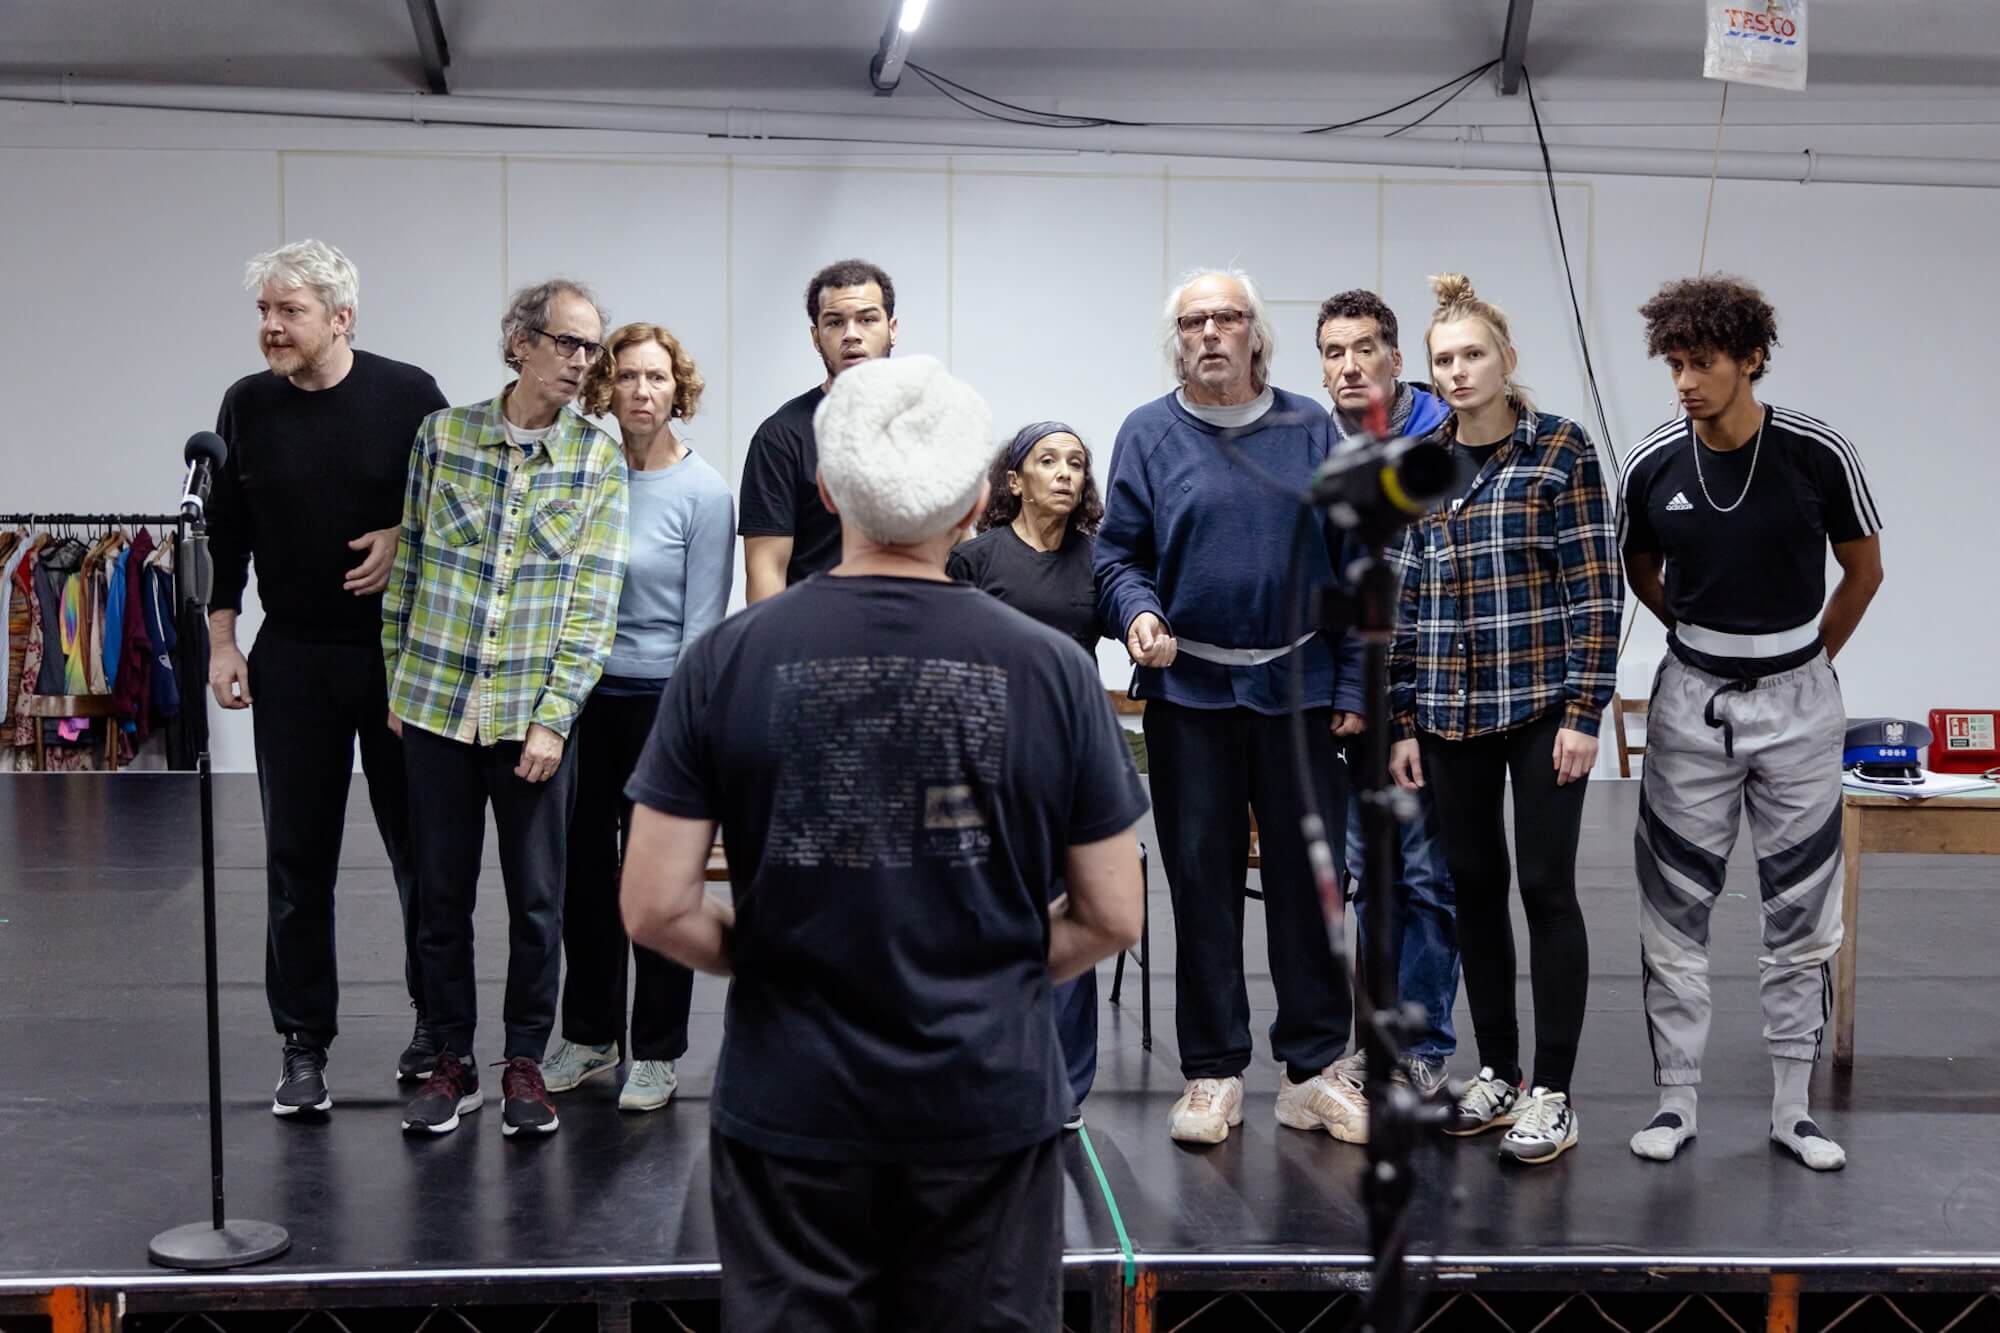 In rehearsals, the cast stand closely in a line staring suspiciously at the camera. Simon McBurney's back is to the camera.